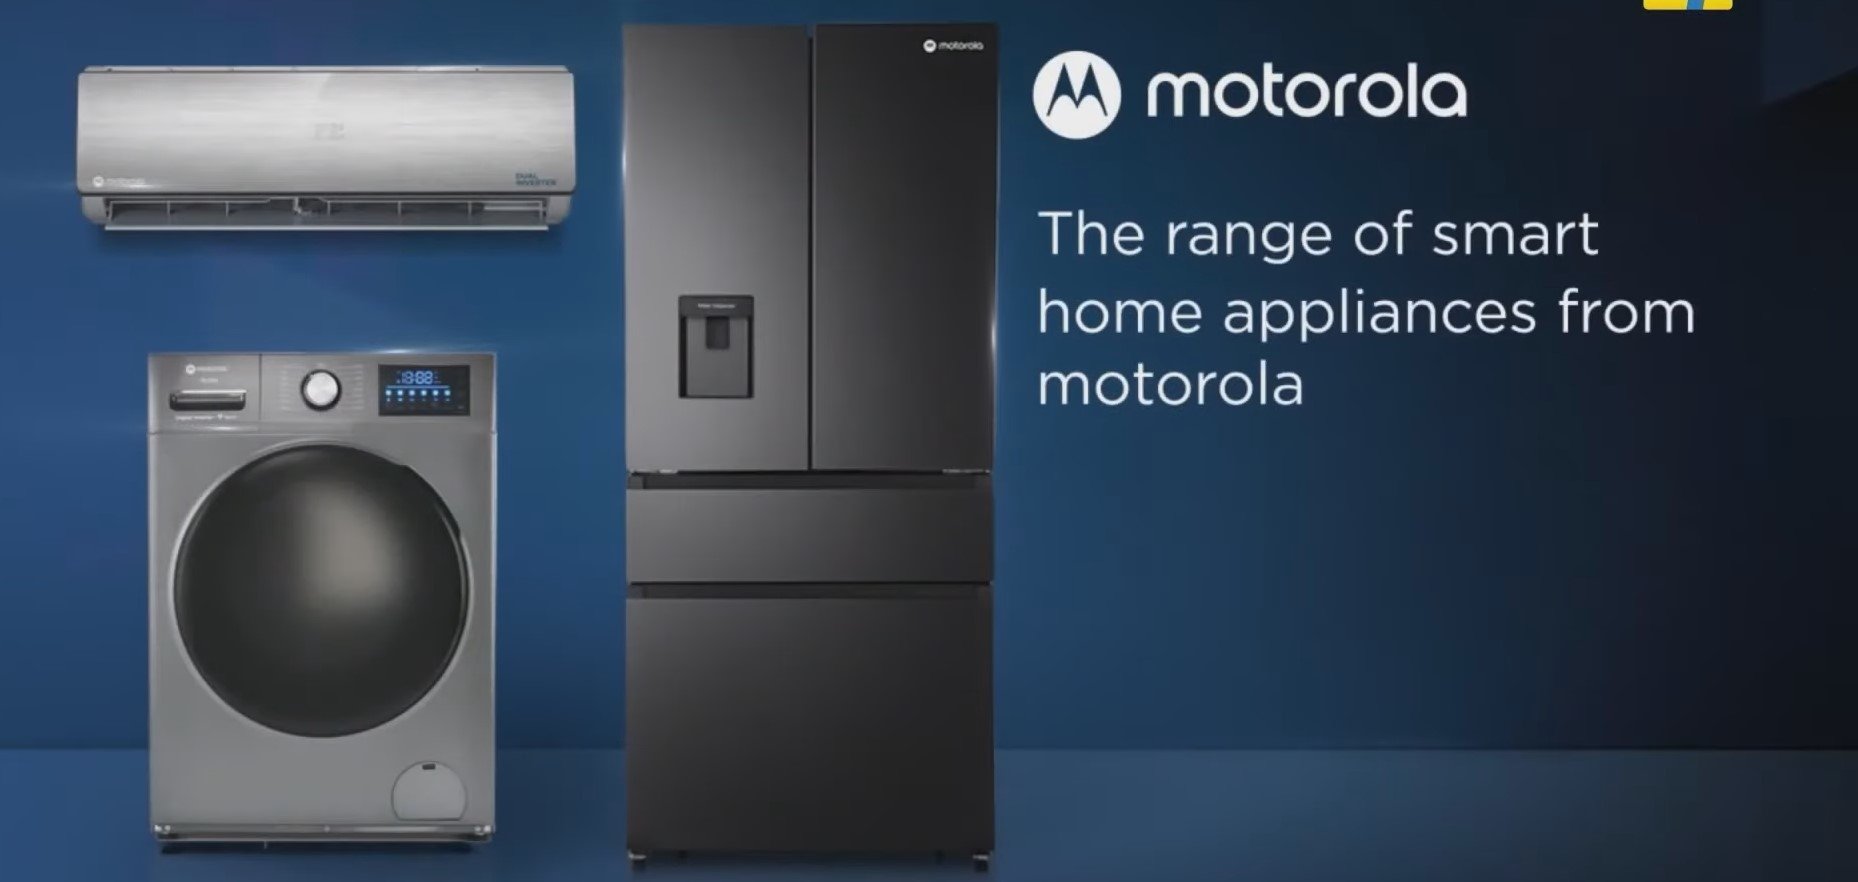 Motorola’s new Smart Home Appliances including AC, Refrigerator, Washing Machines launched in India